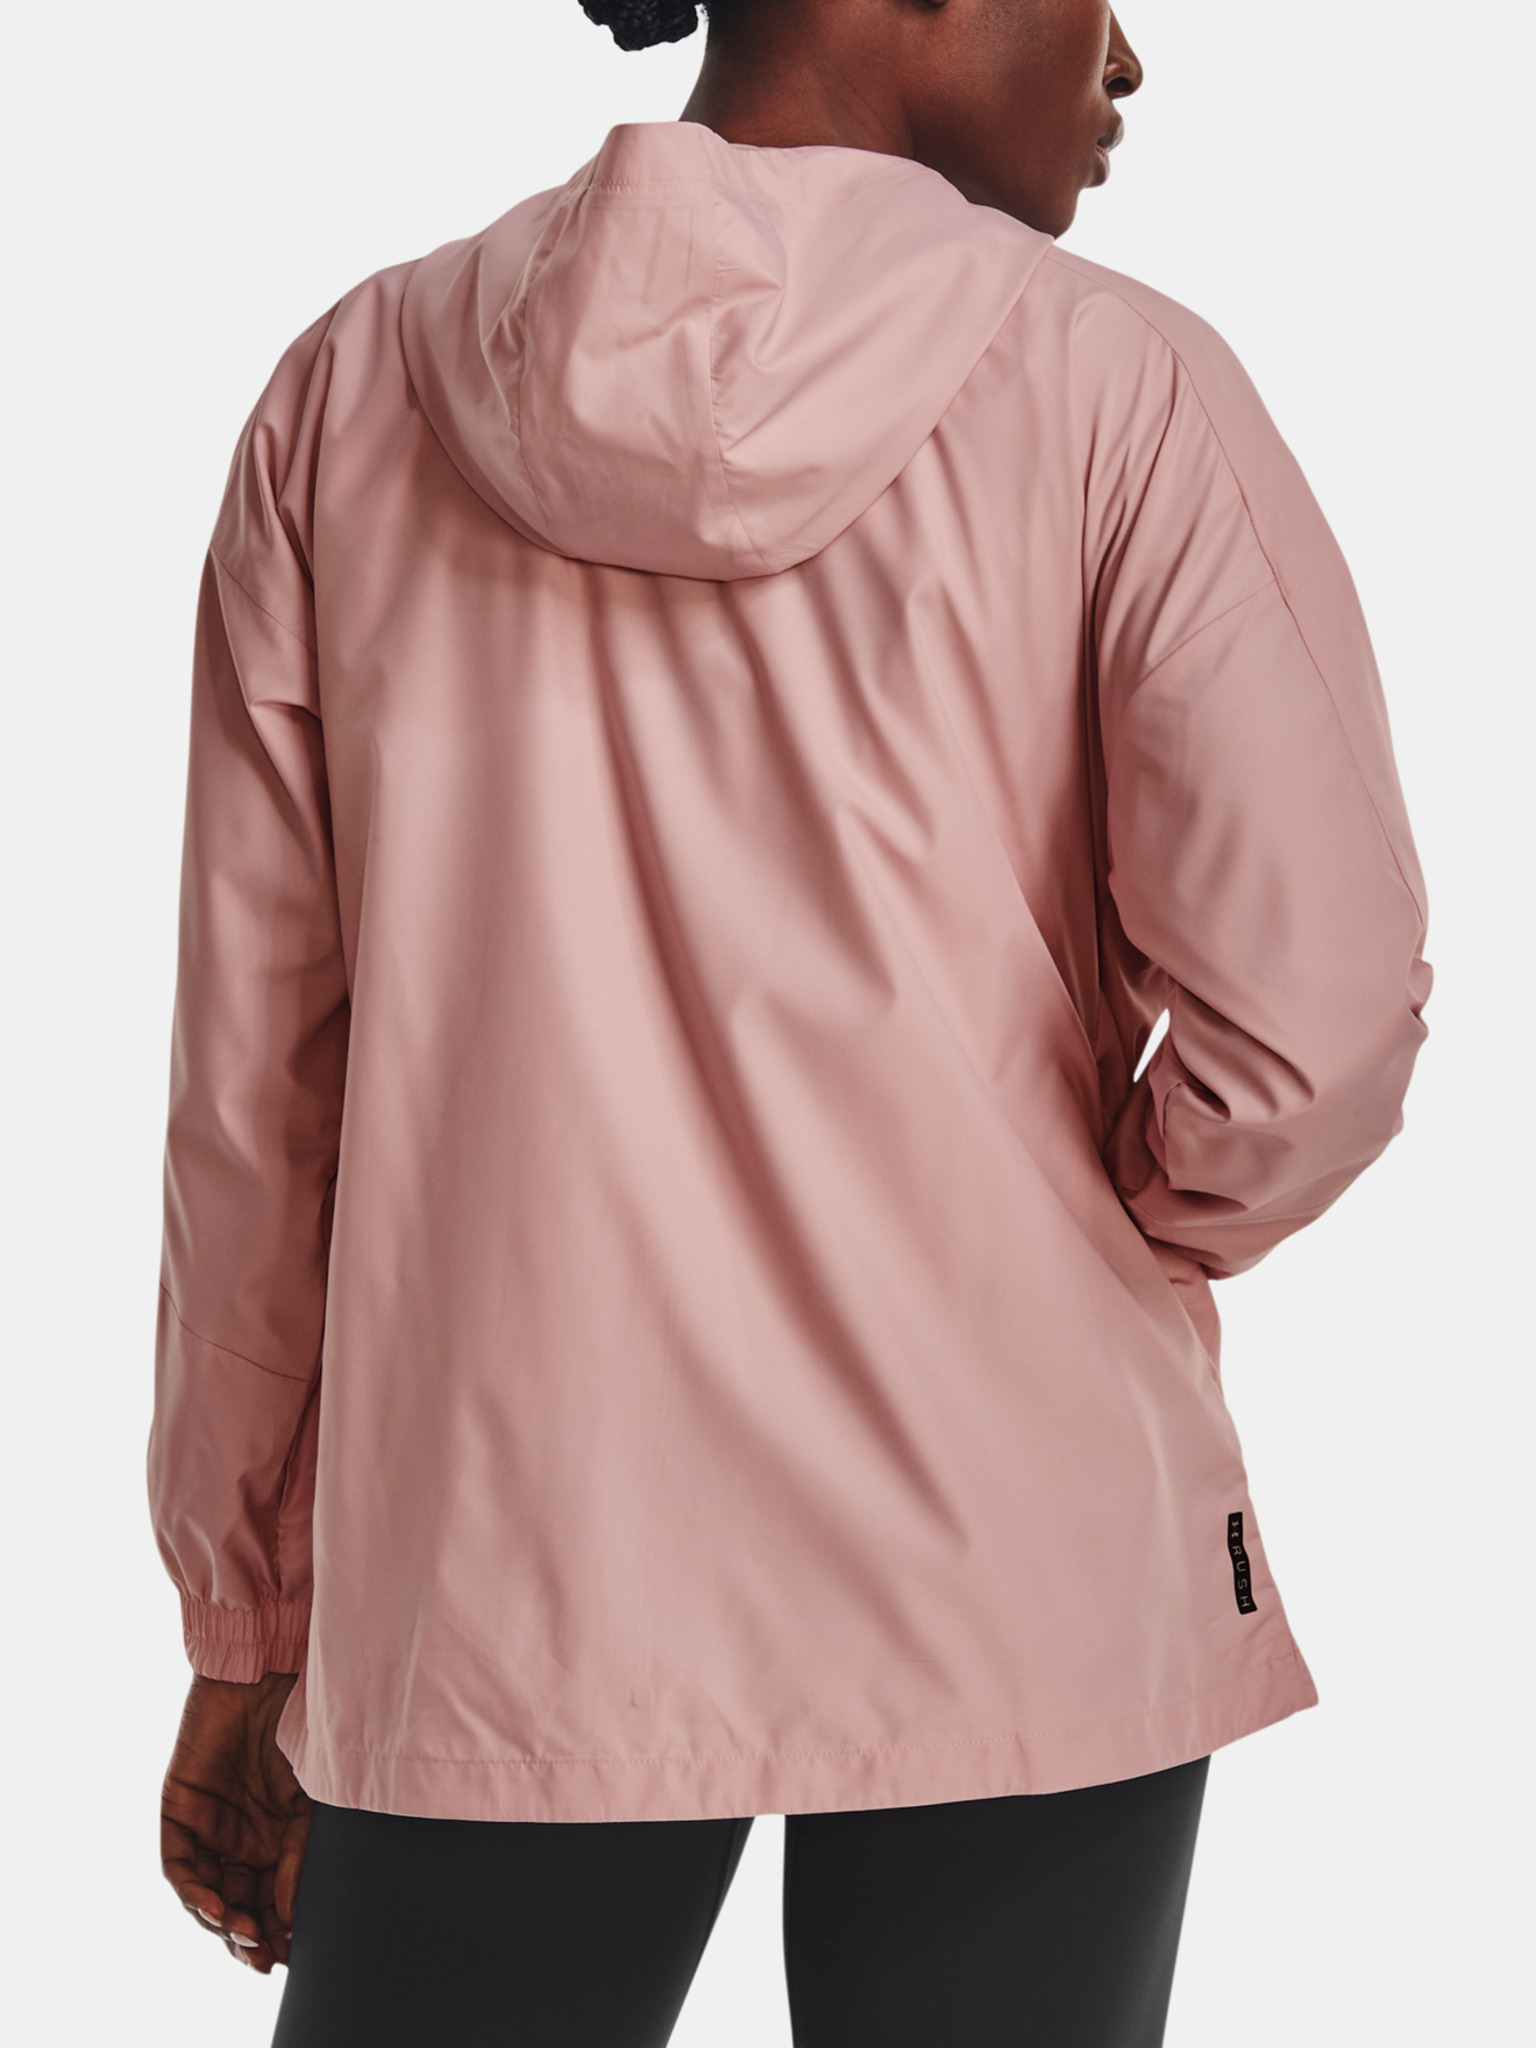 Under Armour Training woven hooded jacket in pink